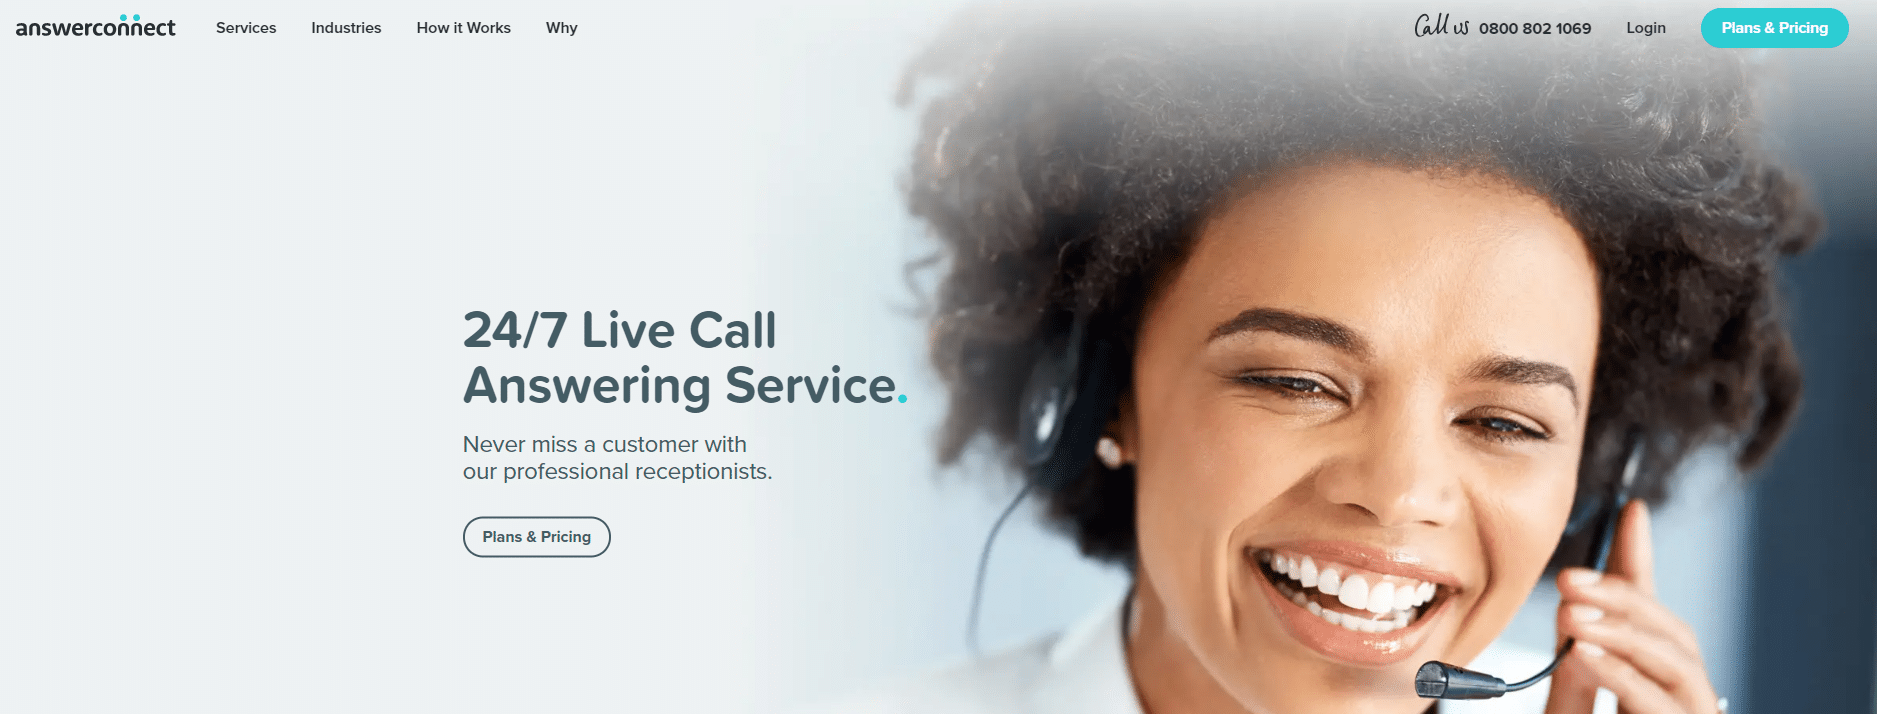 Top 50 List of Best UK Call Centres-233